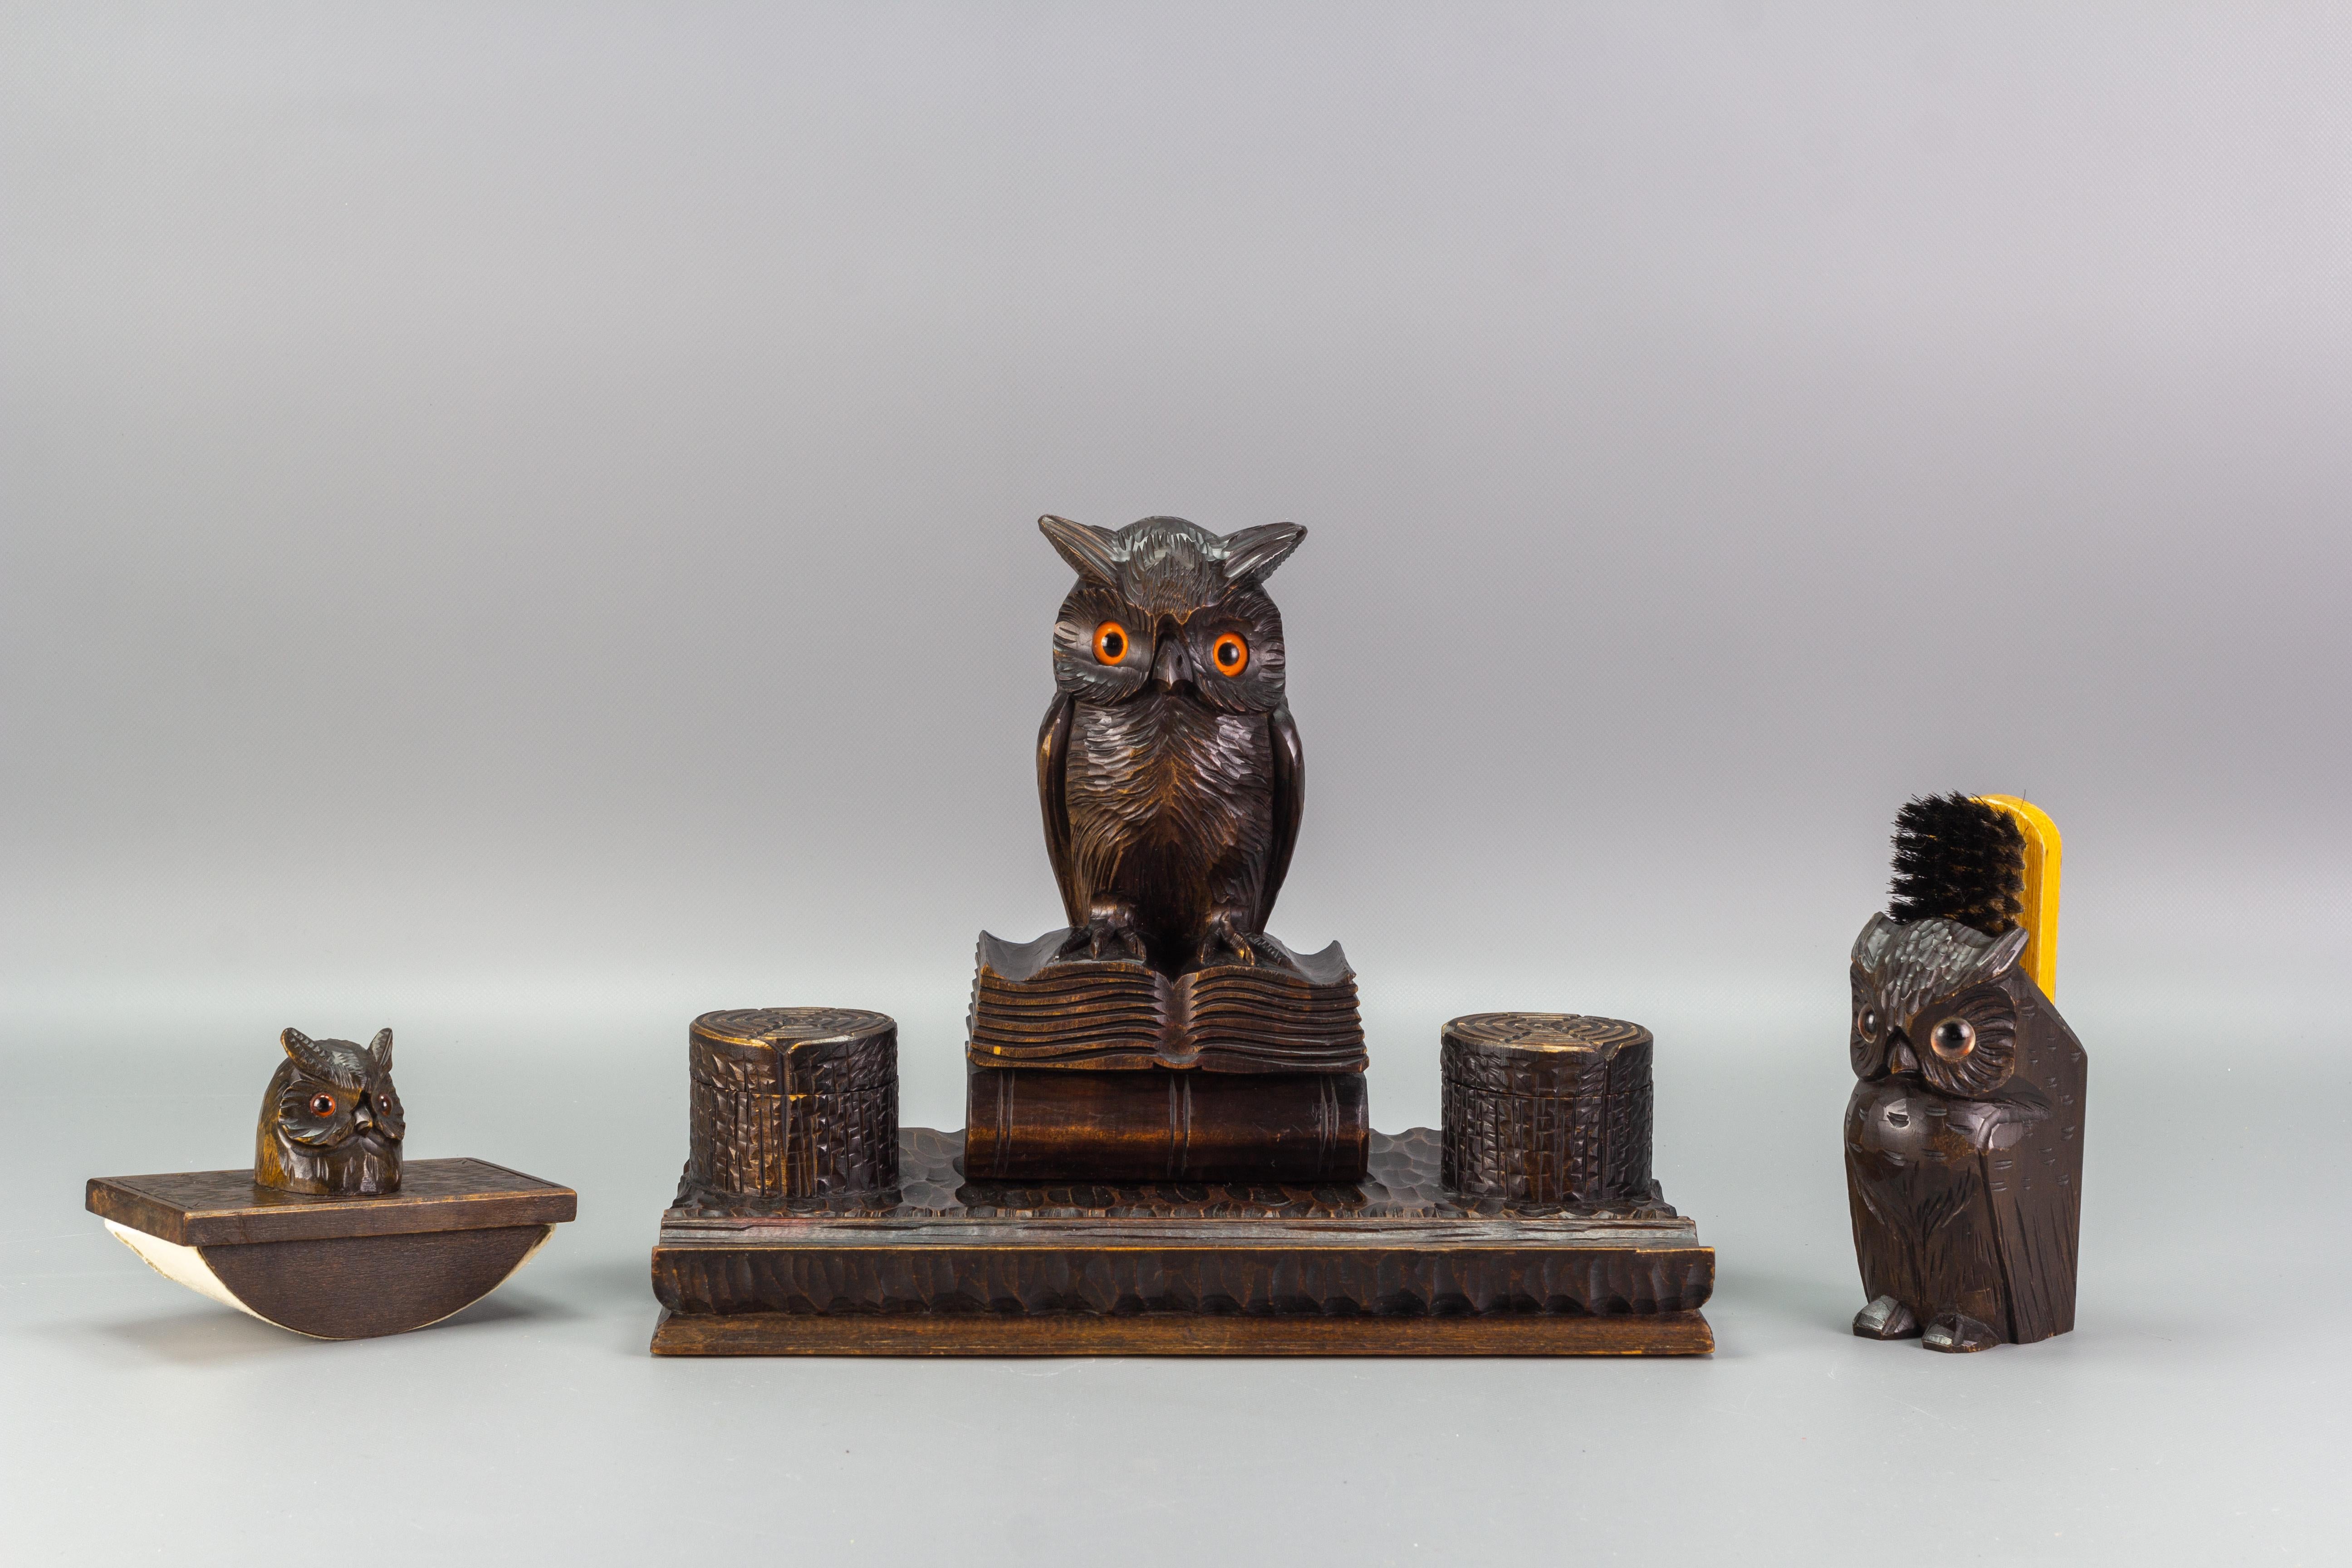 Beautiful Black Forest style hand-carved wooden double inkwell with a majestic owl figure sitting on two books. The owl has glass eyes, and the Stand has a tray for pen and accessories at the front. In the set, there is also an ink blotter and a